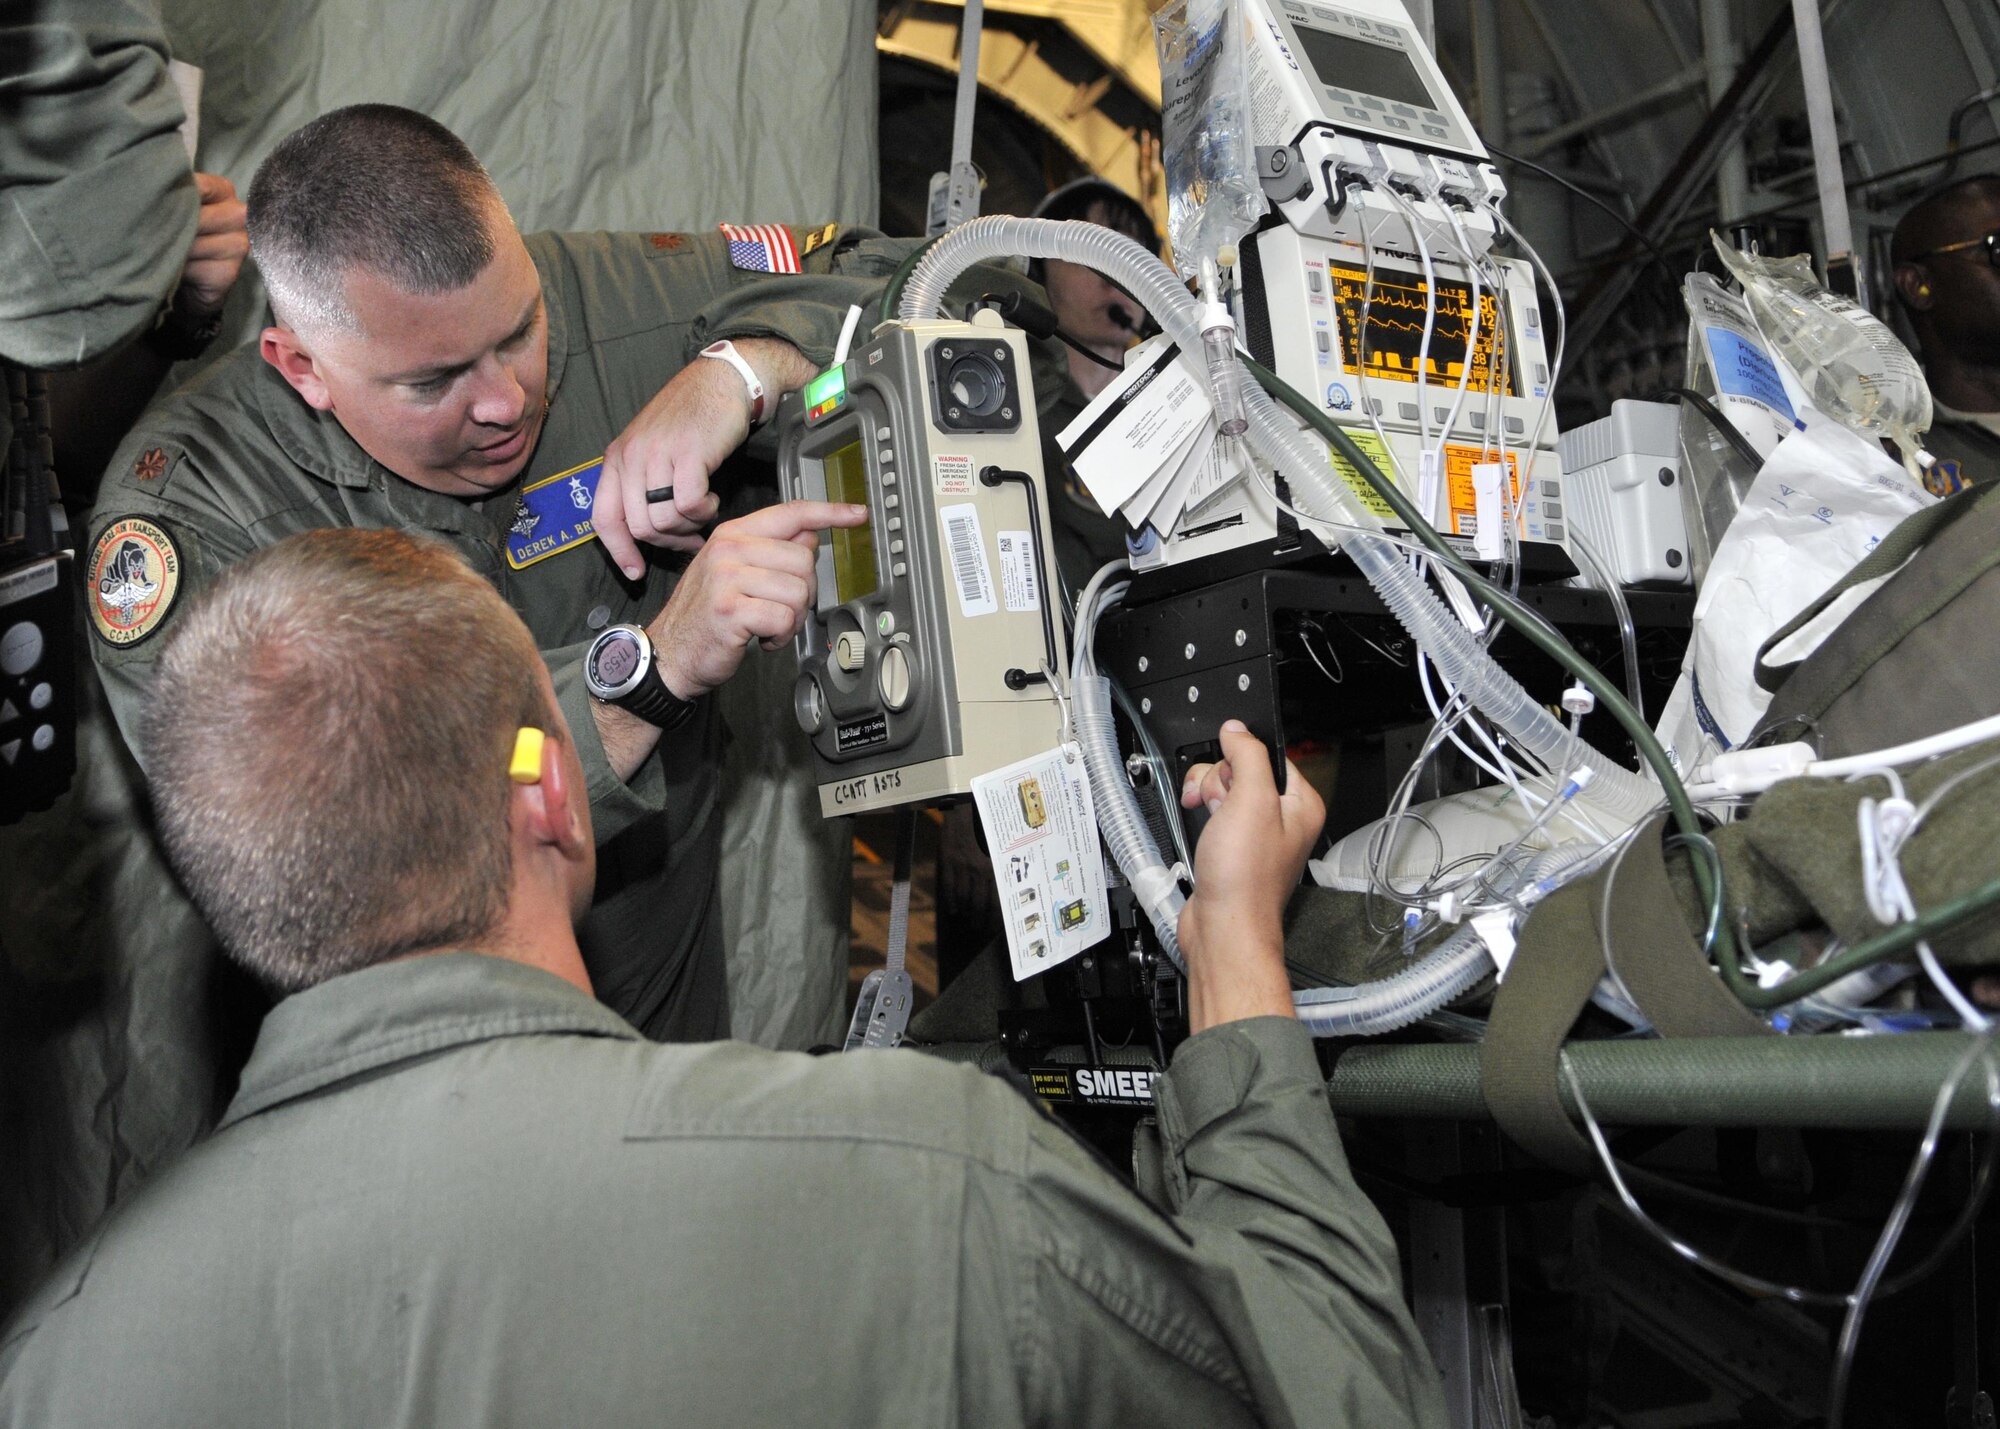 Maj. Derek Brumley, Kentucky Air National Guardsman assigned to the 123rd Medical Group and Staff Sgt. David Rudd, 920th Rescue Wing aeromedical staging squadron, check life support equipment on a C-130/H rescue aircraft during MEDBEACH 2015 joint service exercise at Patrick Air Force Base, Fla., July 11, 2015. This exercise prepares military medical personnel for deployments by providing realistic scenarios that they may see during a wartime situation. (U.S. Air Force photo by Tech. Sgt. Michael Means)
